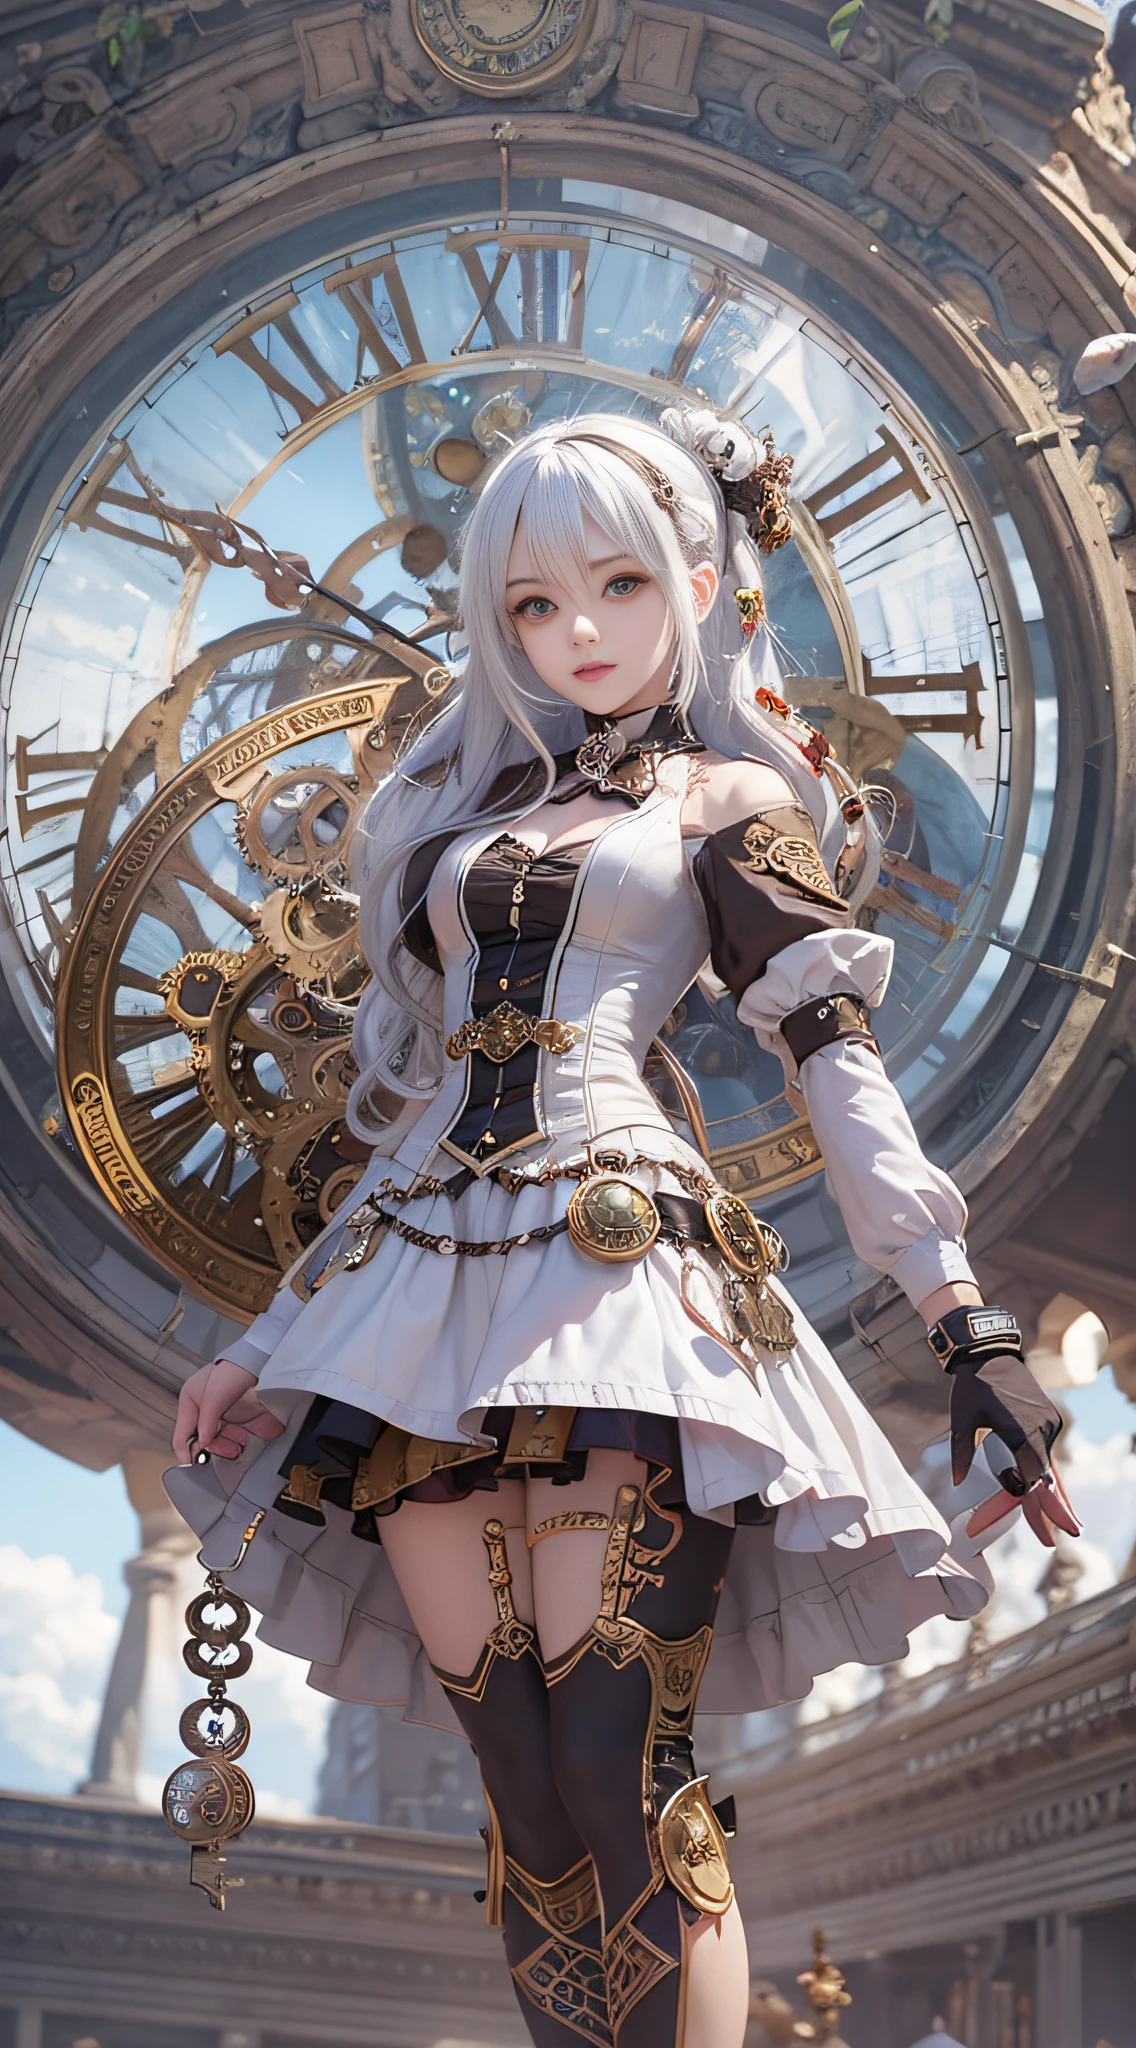 Anime girl with white hair and steampunk costume standing in front of the clock tower, steampunk beautiful anime woman, steampunk fantasy style, Vivid steampunk concept, 2. 5 d cgi anime fantasy artwork, mechanized witch girl, cushart krenz key art feminine, anime fantasy artwork, a steampunk beautiful goddess, Steampunk Girl, rococo cyberpunk